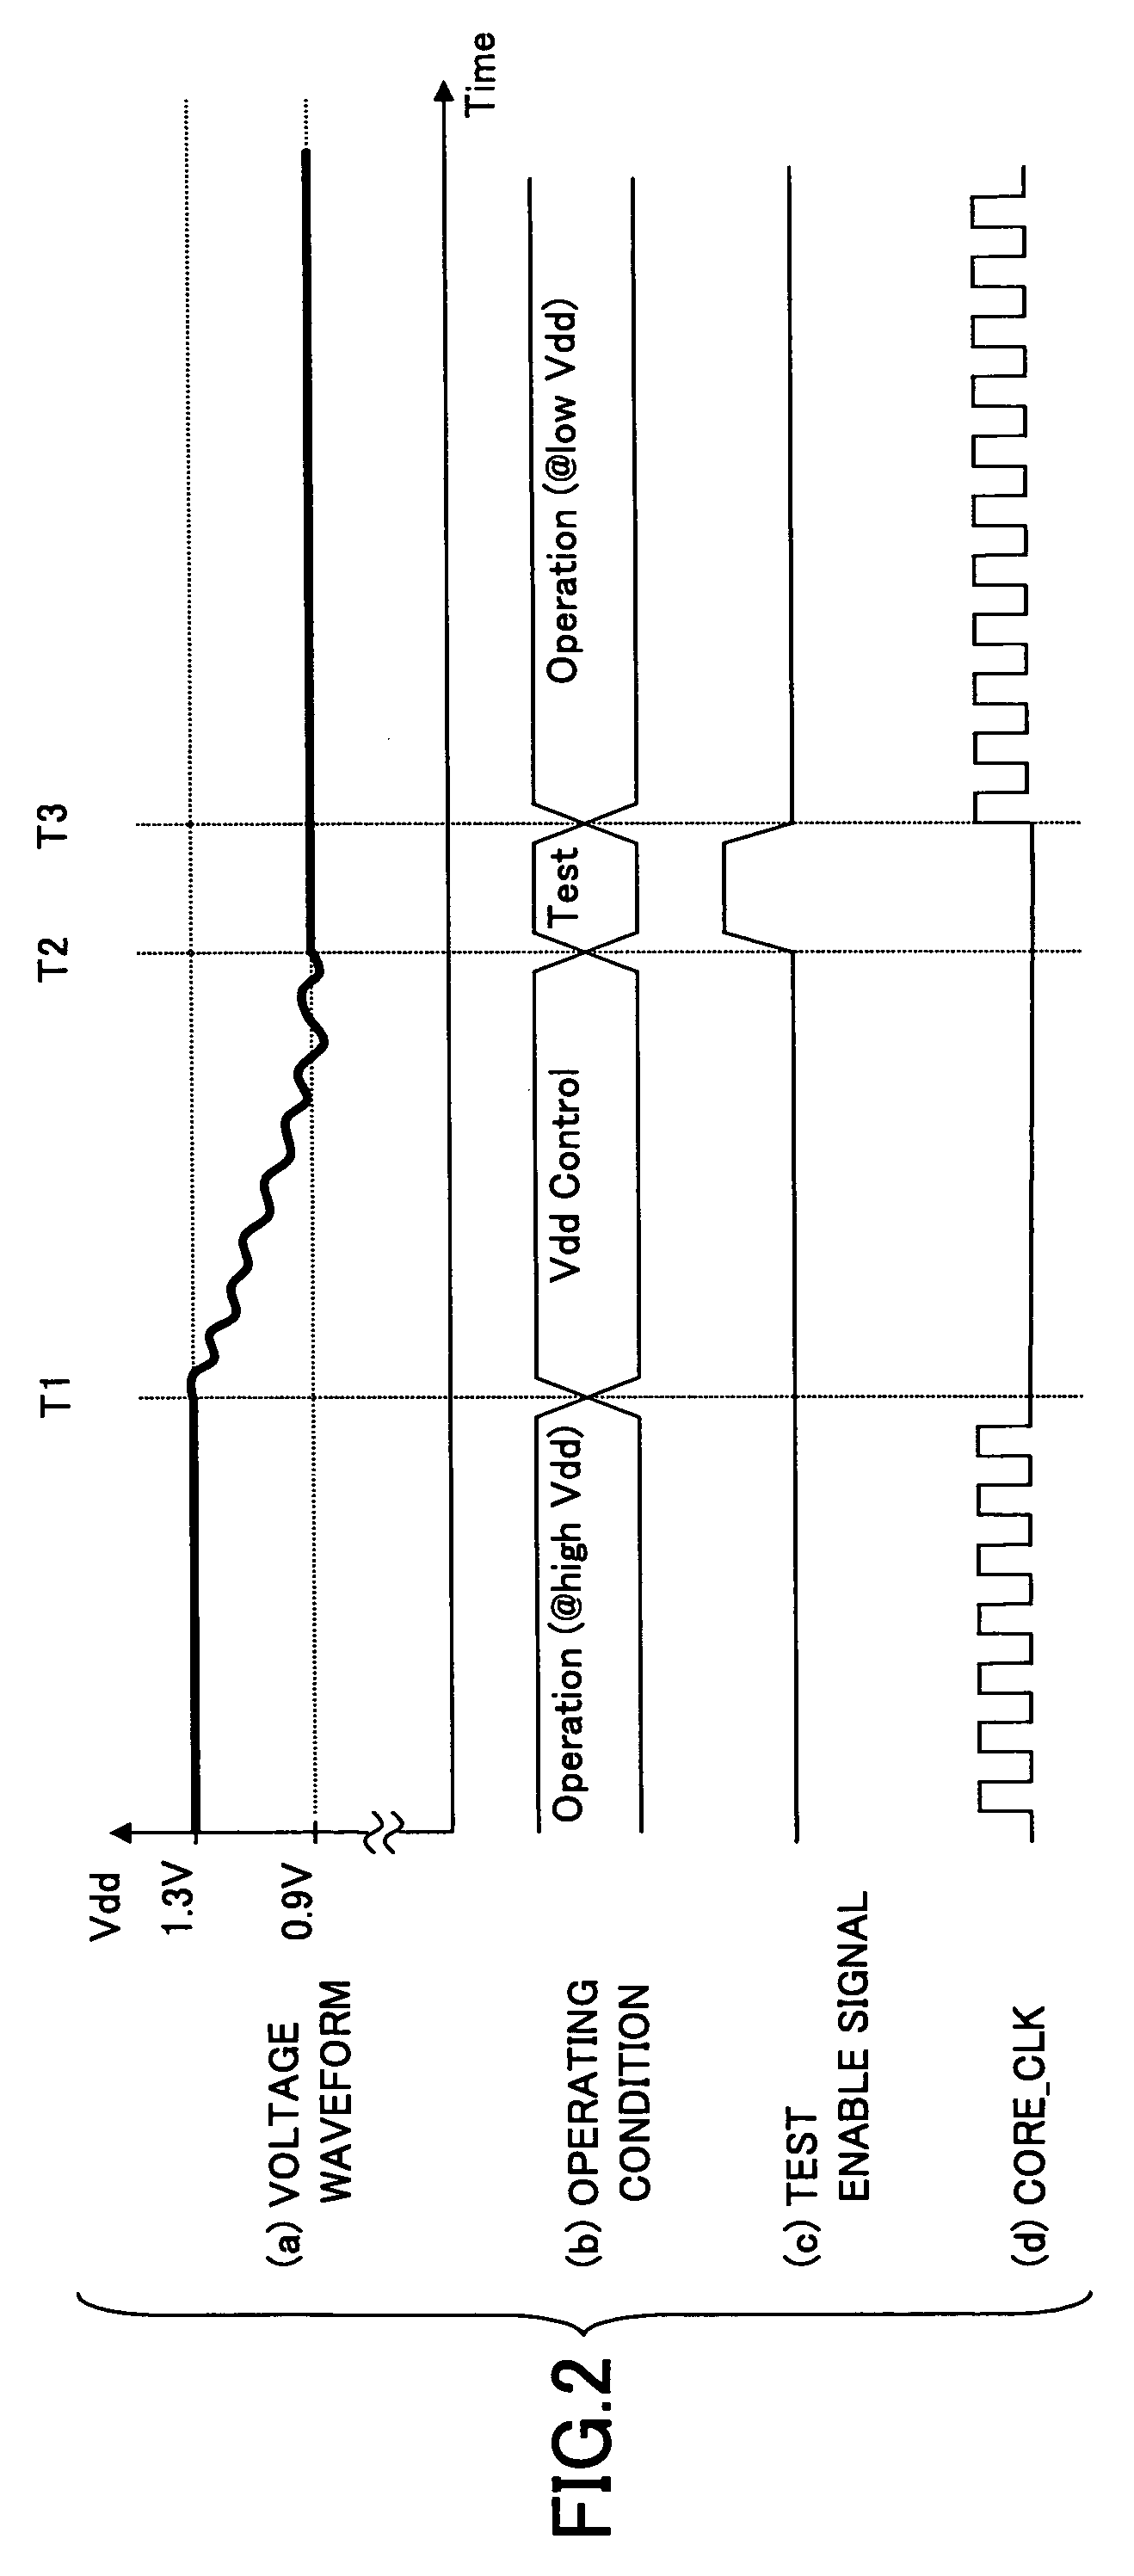 Changing of operating voltage in semiconductor integrated circuit